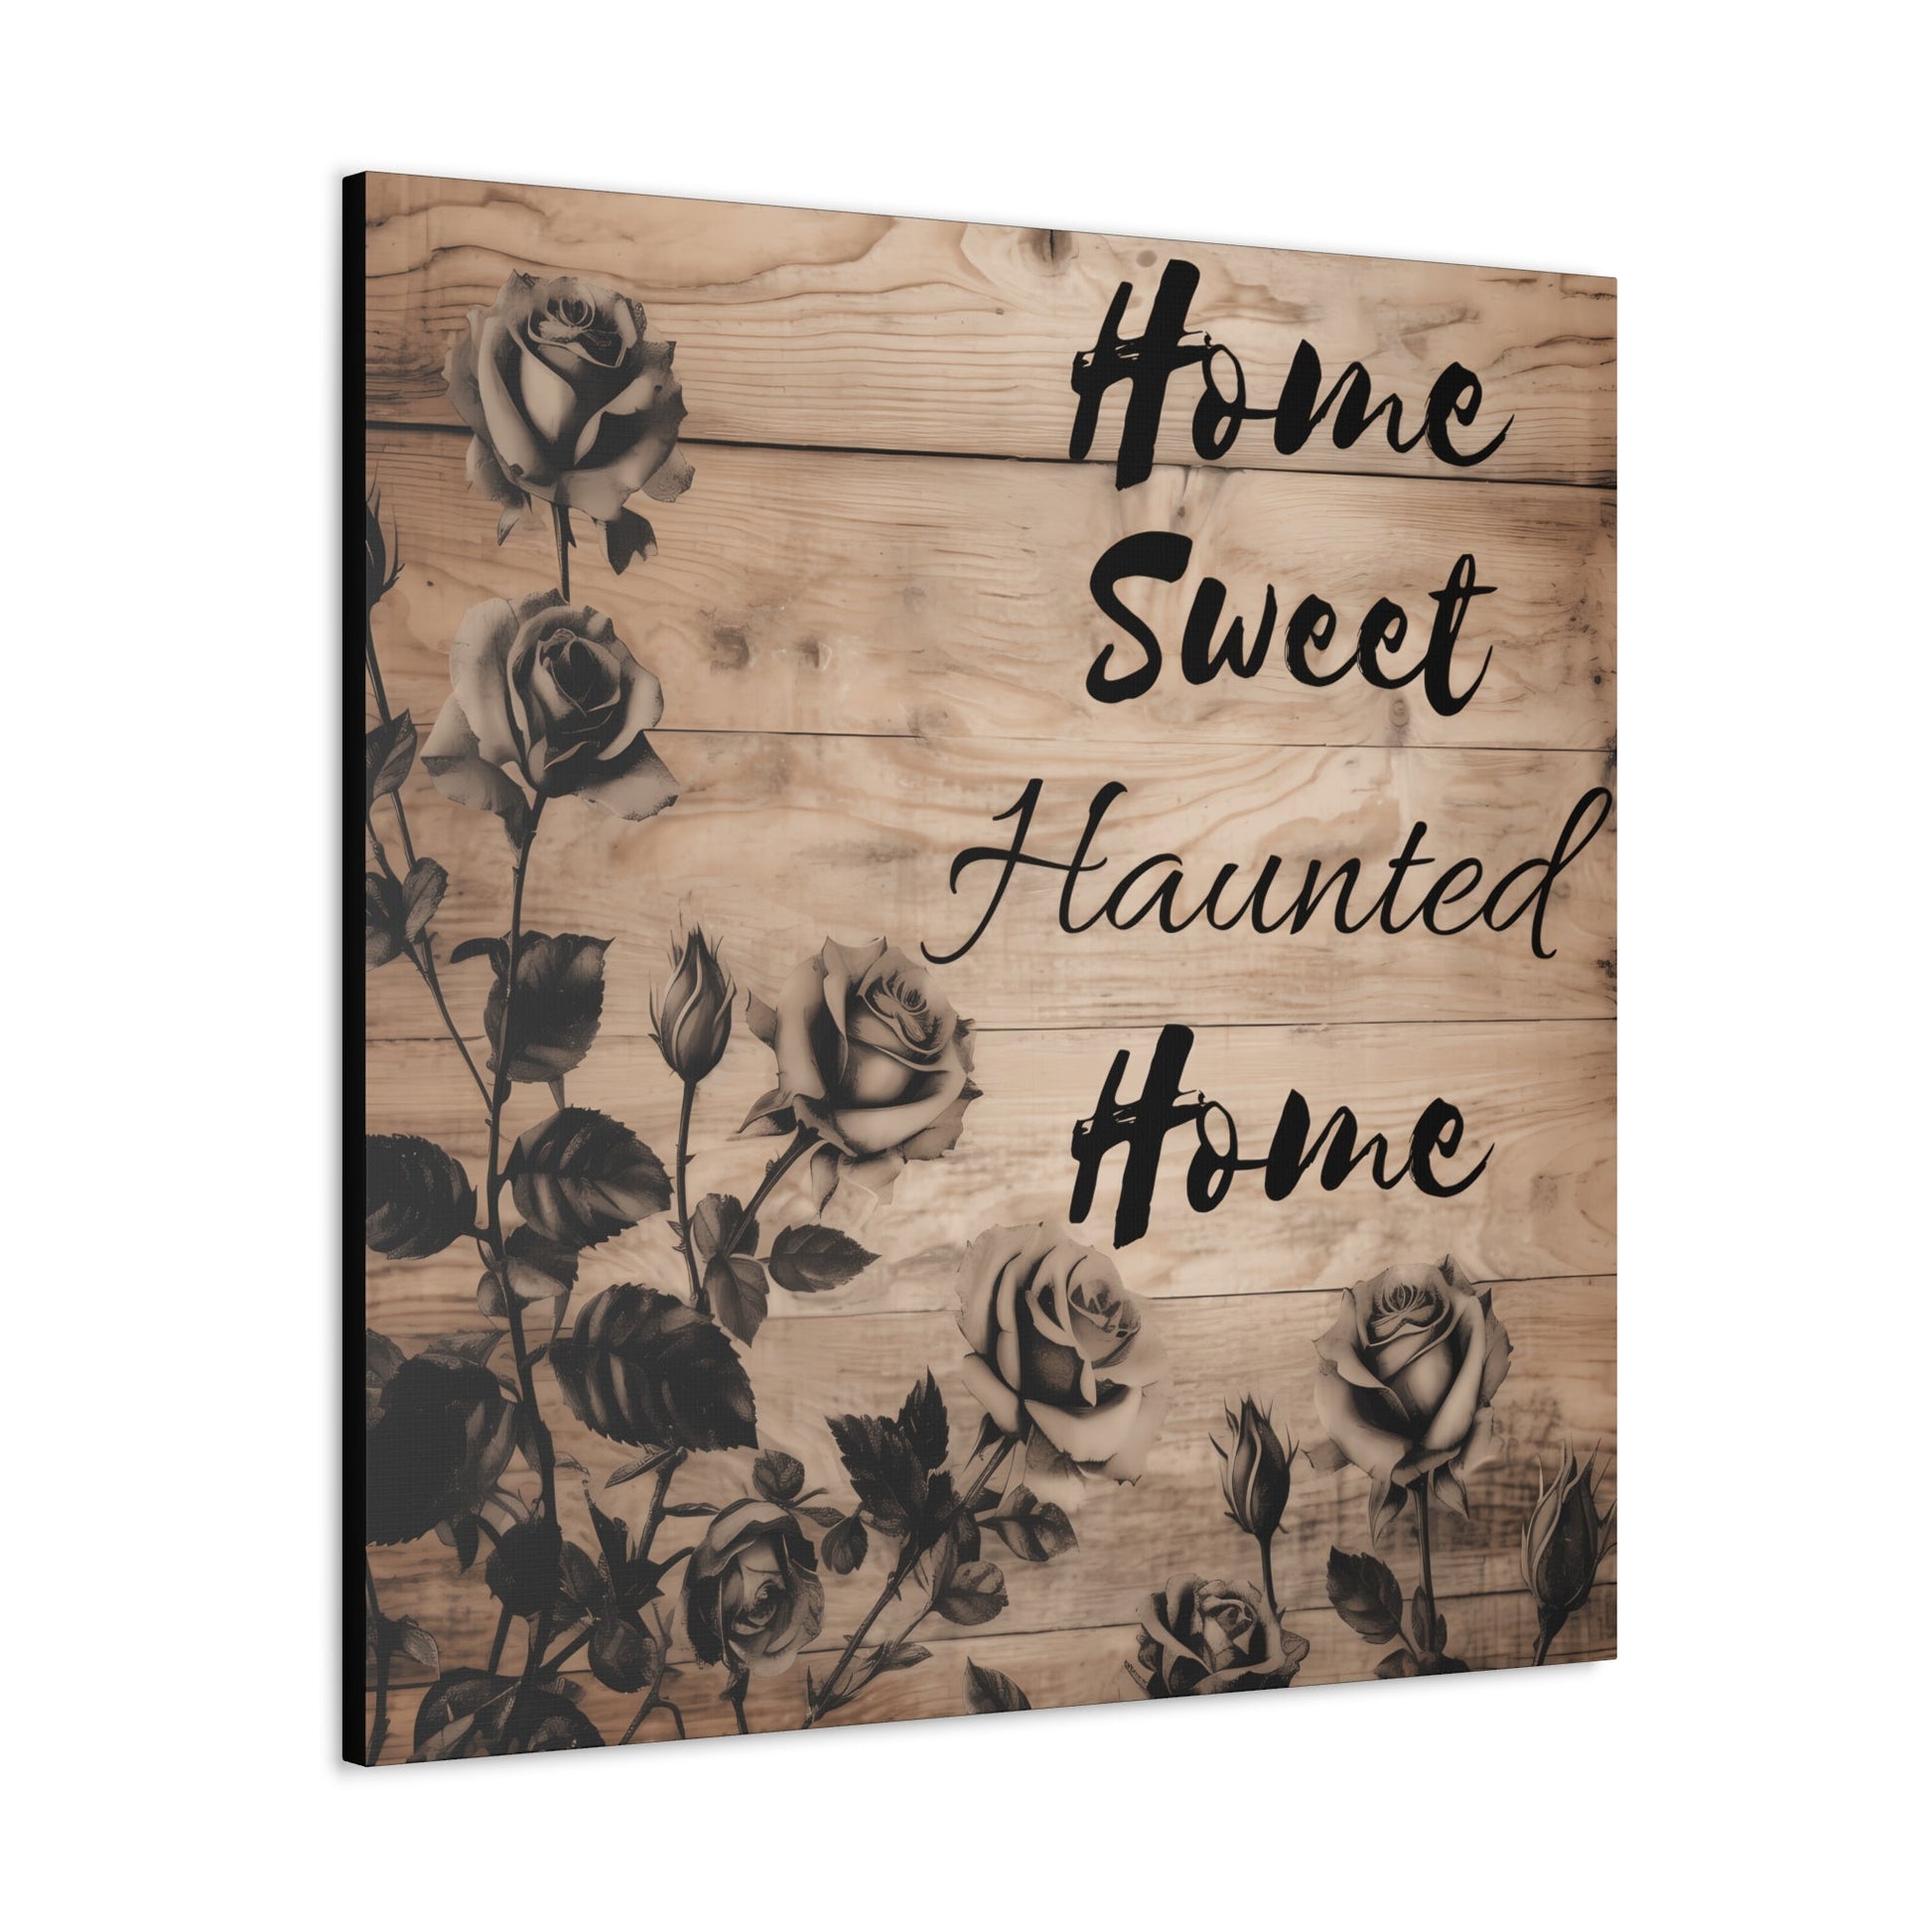 Home Sweet Haunted Home Black Roses Canvas Gallery WrapCanvasVTZdesigns36″ x 36″1.25"Art & Wall DecorCanvasFall Picks